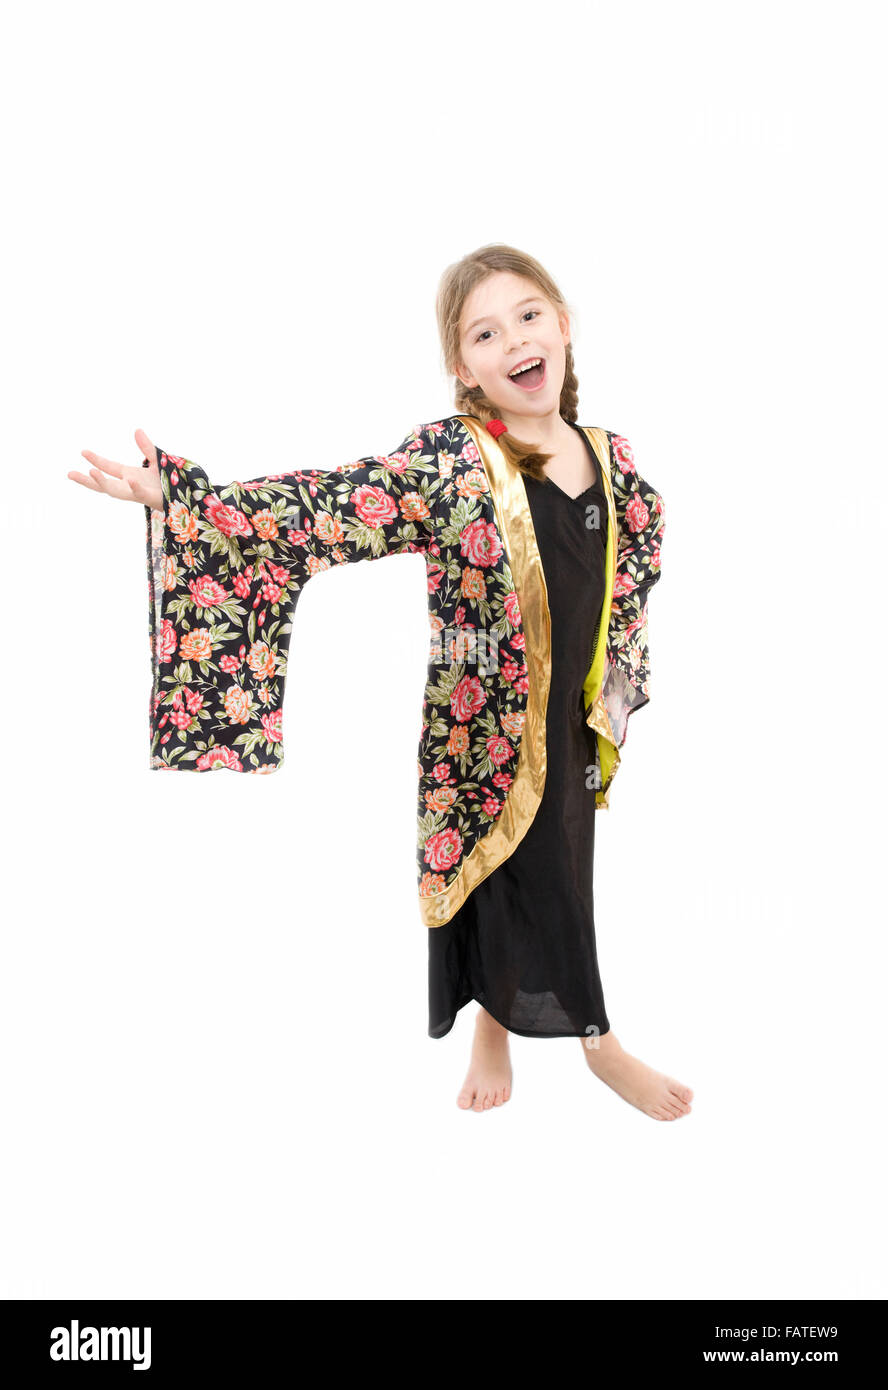 young girl playing dress up wearing a Japanese kimono and singing on white background Stock Photo